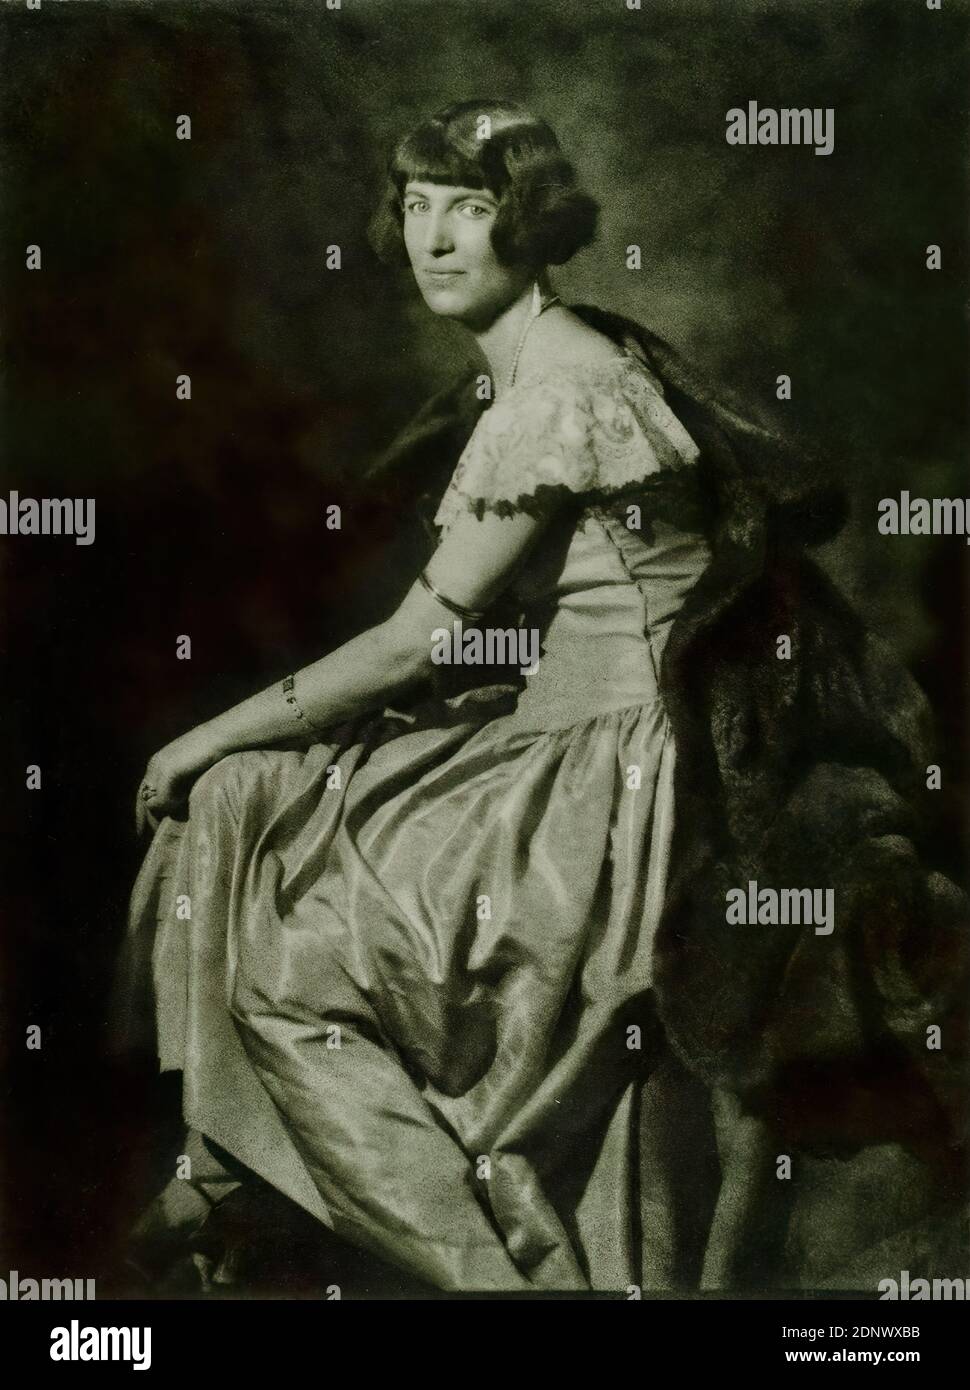 Franz Grainer, Portrait of a woman, Staatliche Landesbildstelle Hamburg, collection on the history of photography, paper, brome oil print, image size: height: 46,2 cm; width: 34 cm, signed: recto u. re. in lead: Grainer, stamp: verso and left: stamp and object inscription of the Staatliche Landesbildstelle Hamburg, portrait photography, full-length portrait, half profile (three-quarter view), sitting figure, fashion, clothing, woman, portrait Stock Photo